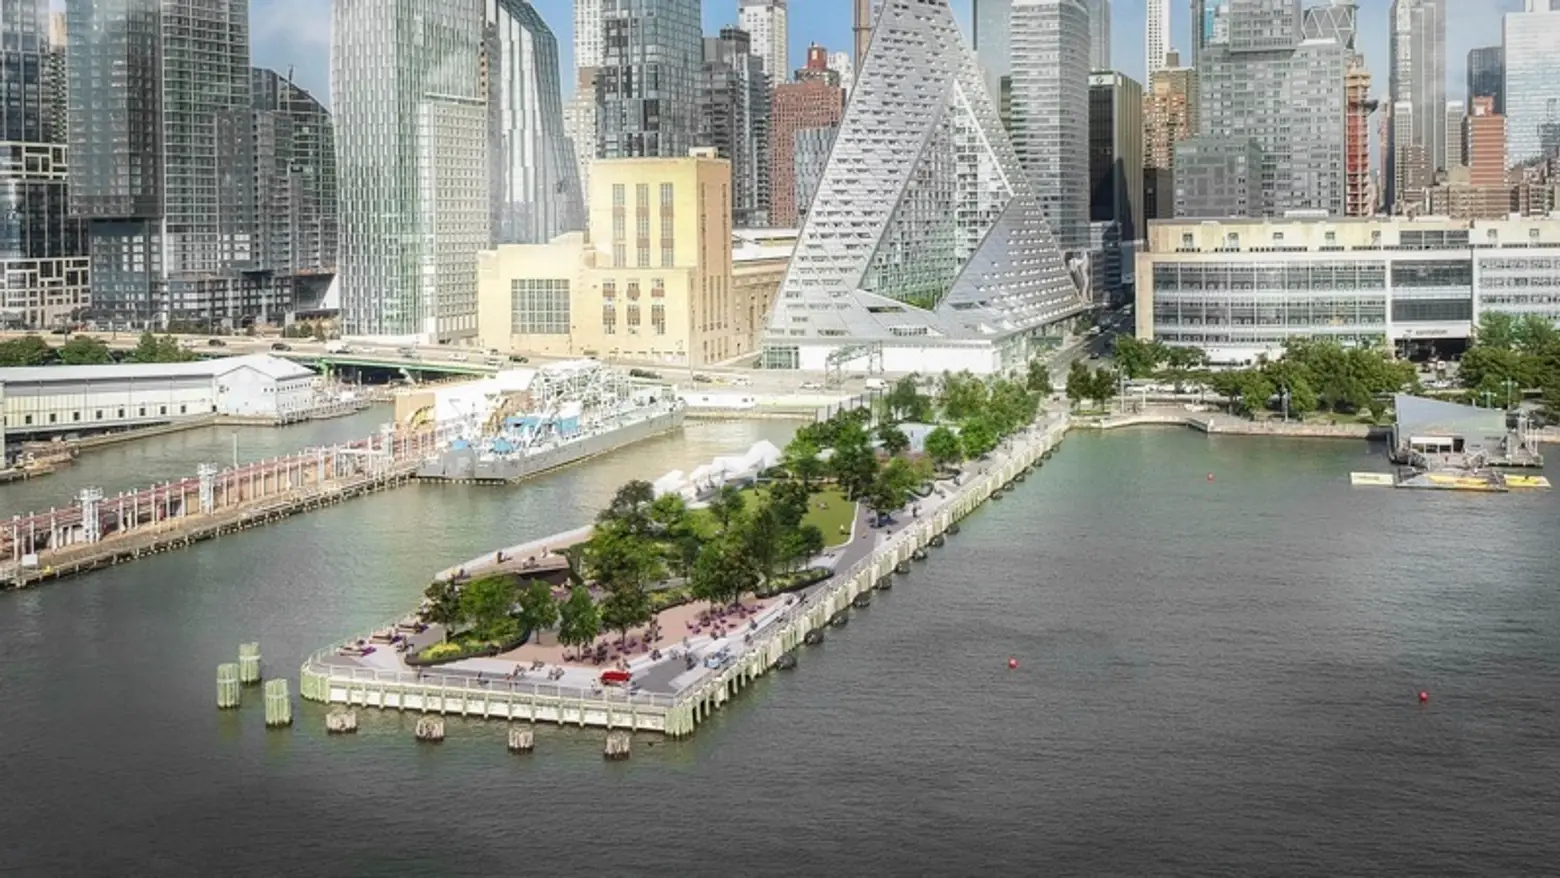 Get a new look at Hudson River Park’s Pier 97 after $38M revamp